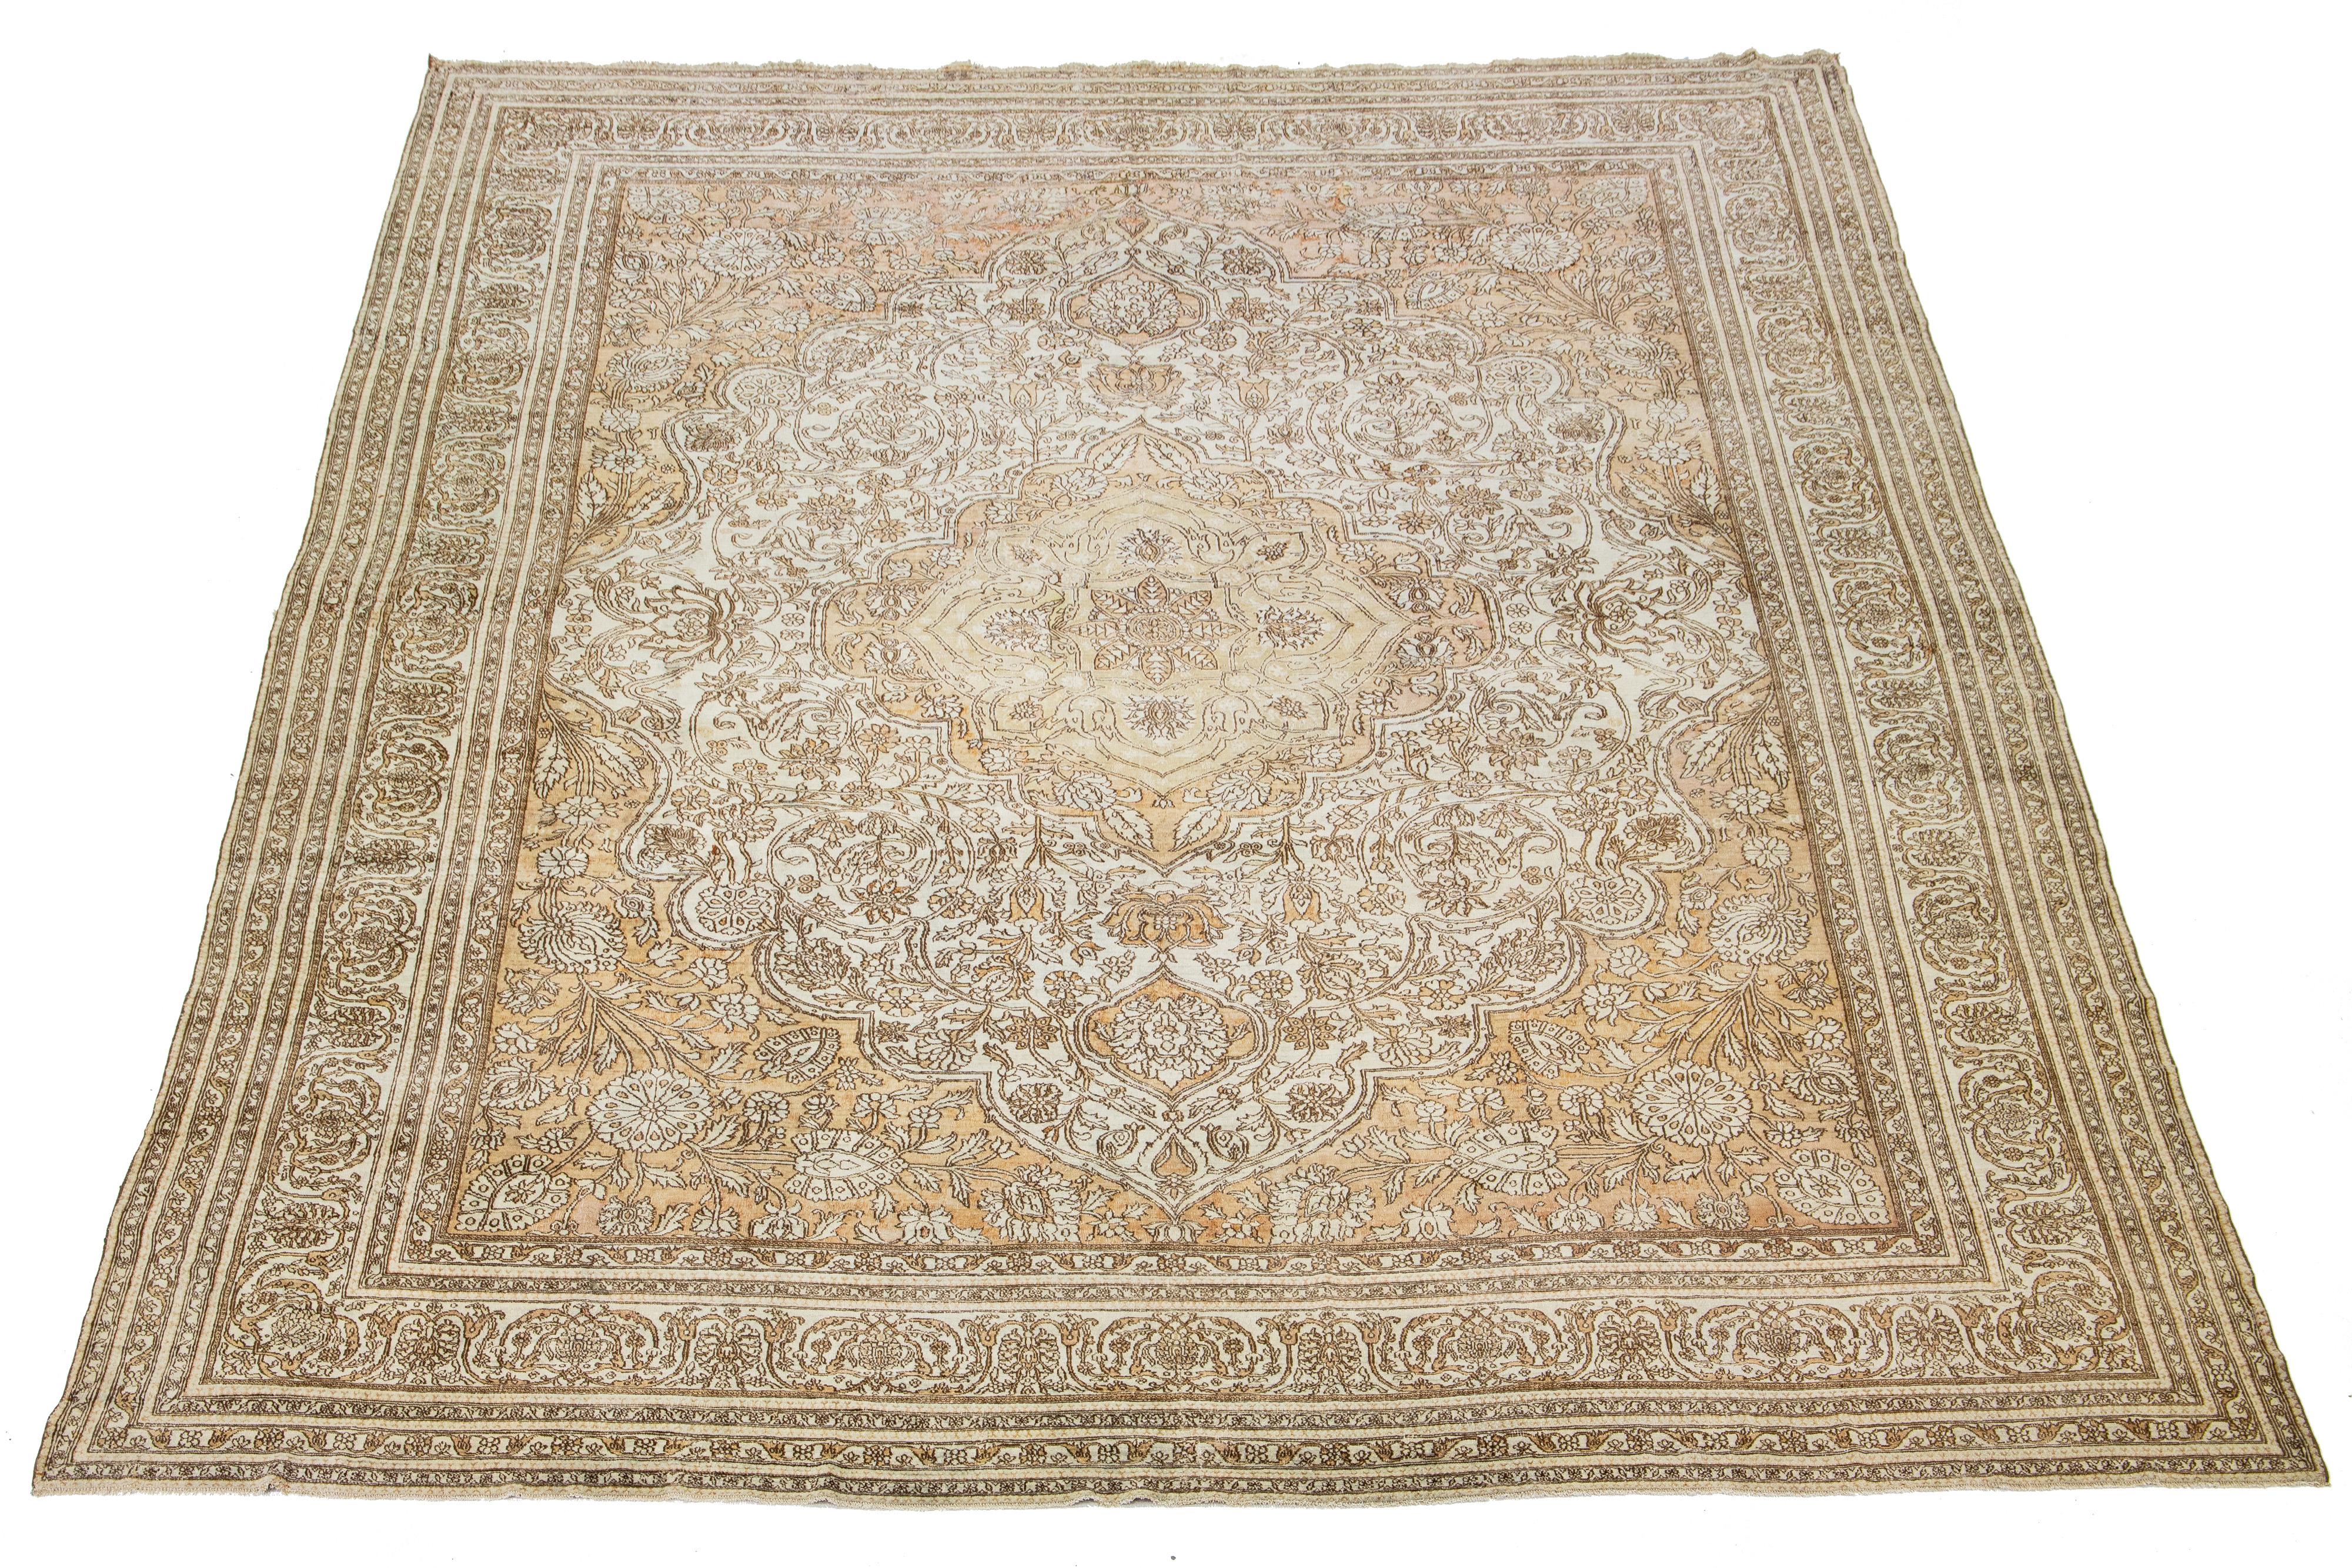 This exquisite hand-knotted Agra wool rug features an ivory field accented by tan motifs in a timeless medallion floral pattern.

This rug measures 12'8